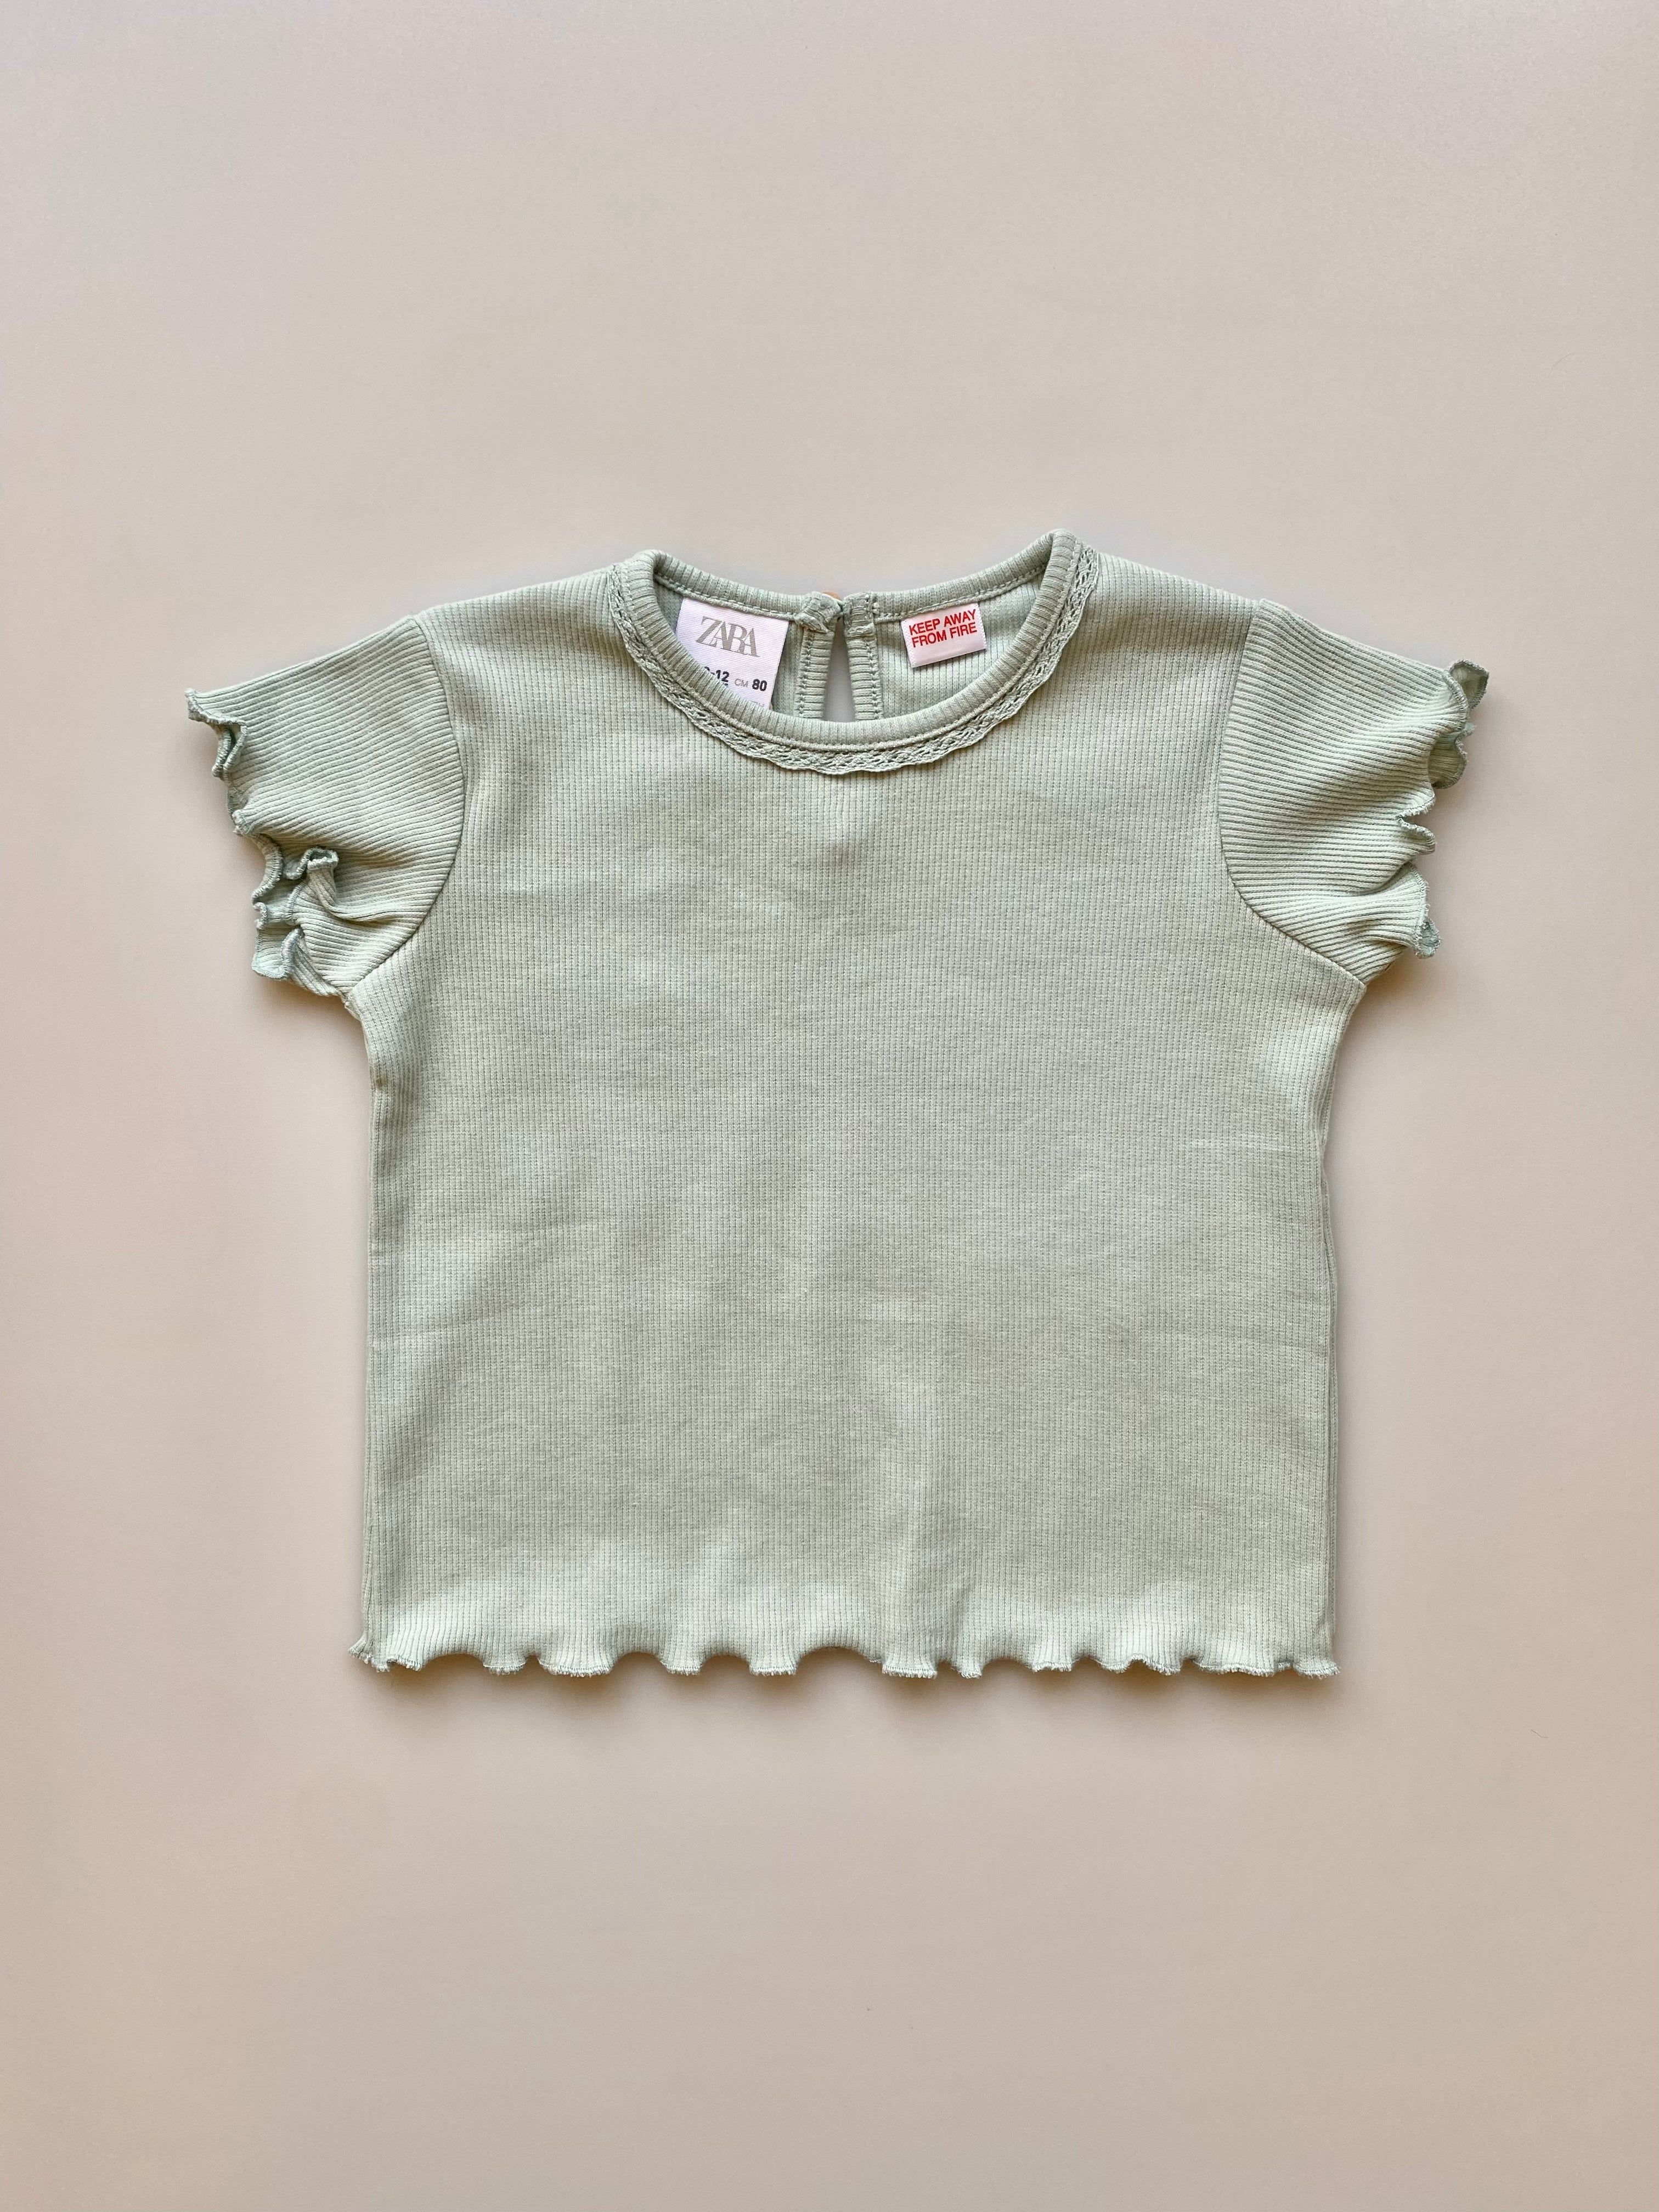 Zara Teal Ribbed Tee With Lace Detail 9-12 Months